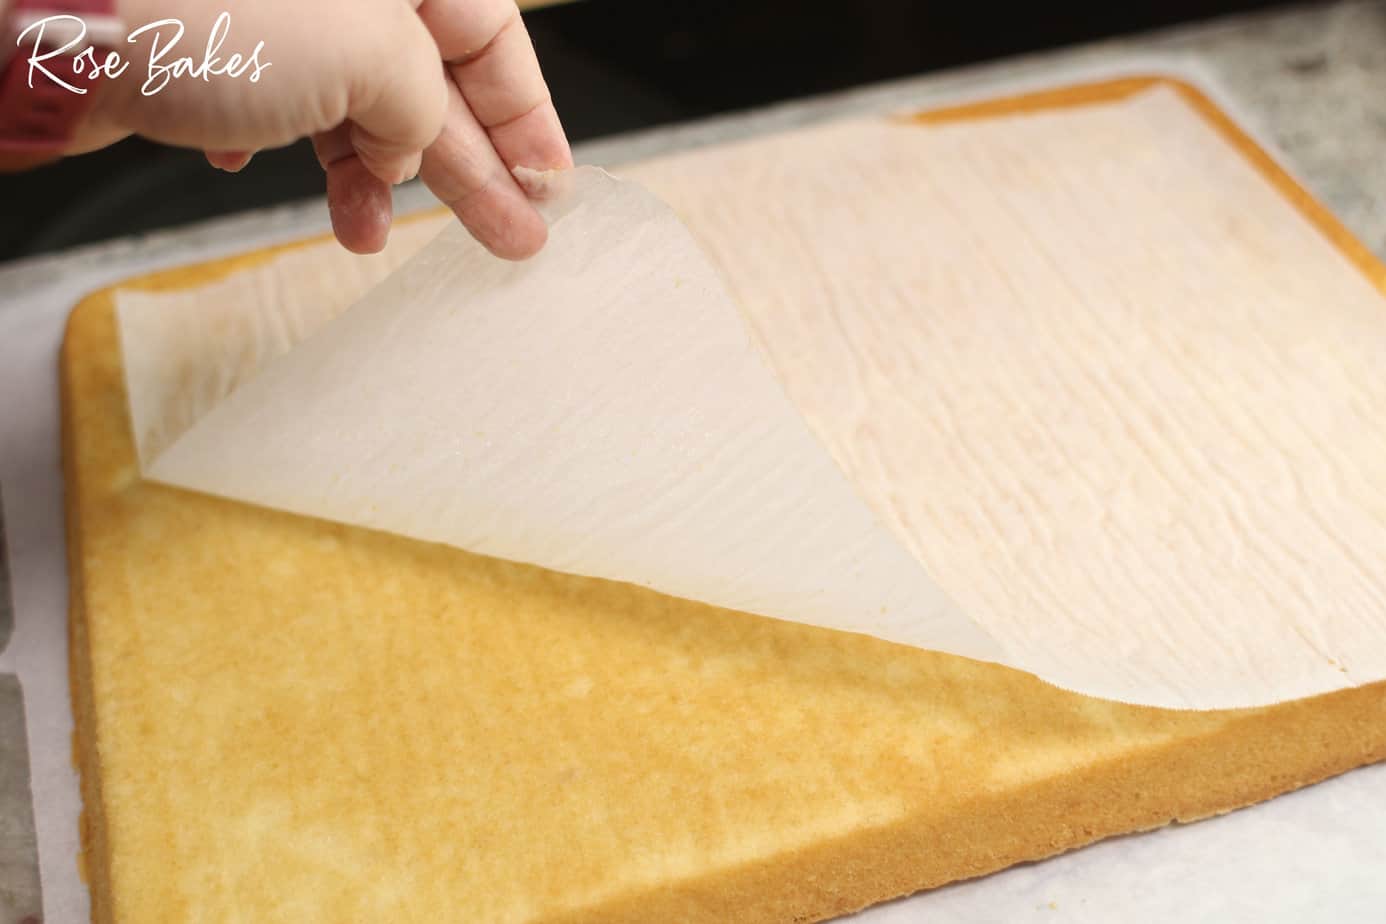 parchment paper being peeled off the baked cake.